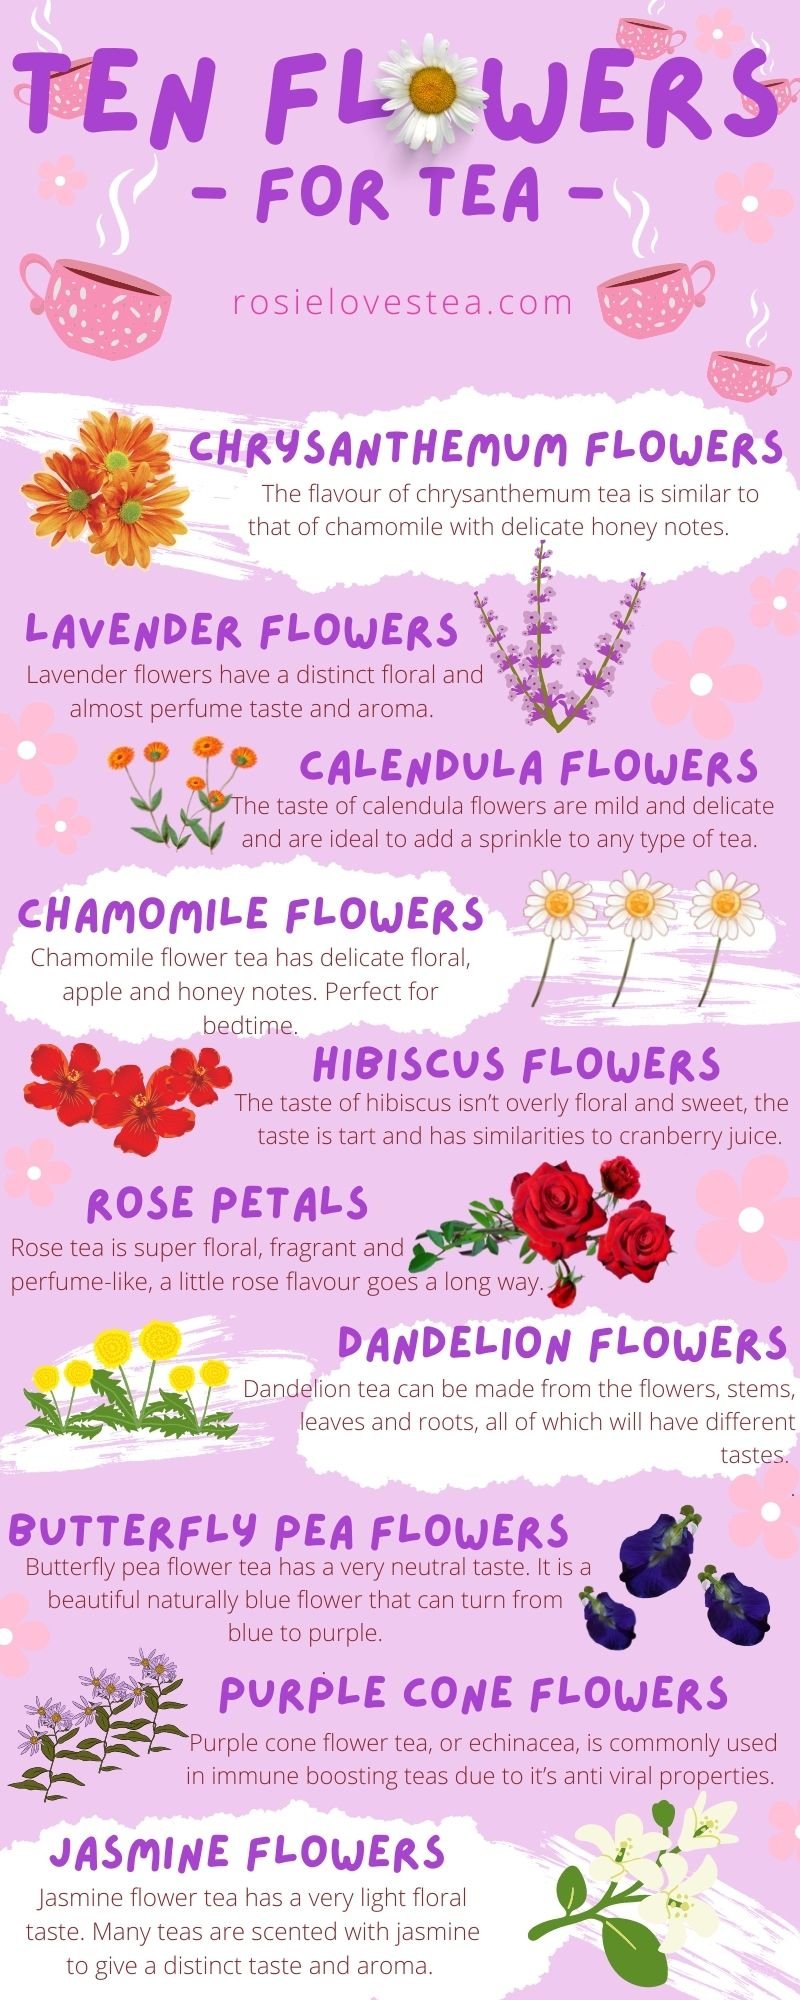 10 Flowers to use and Infuse in Tea